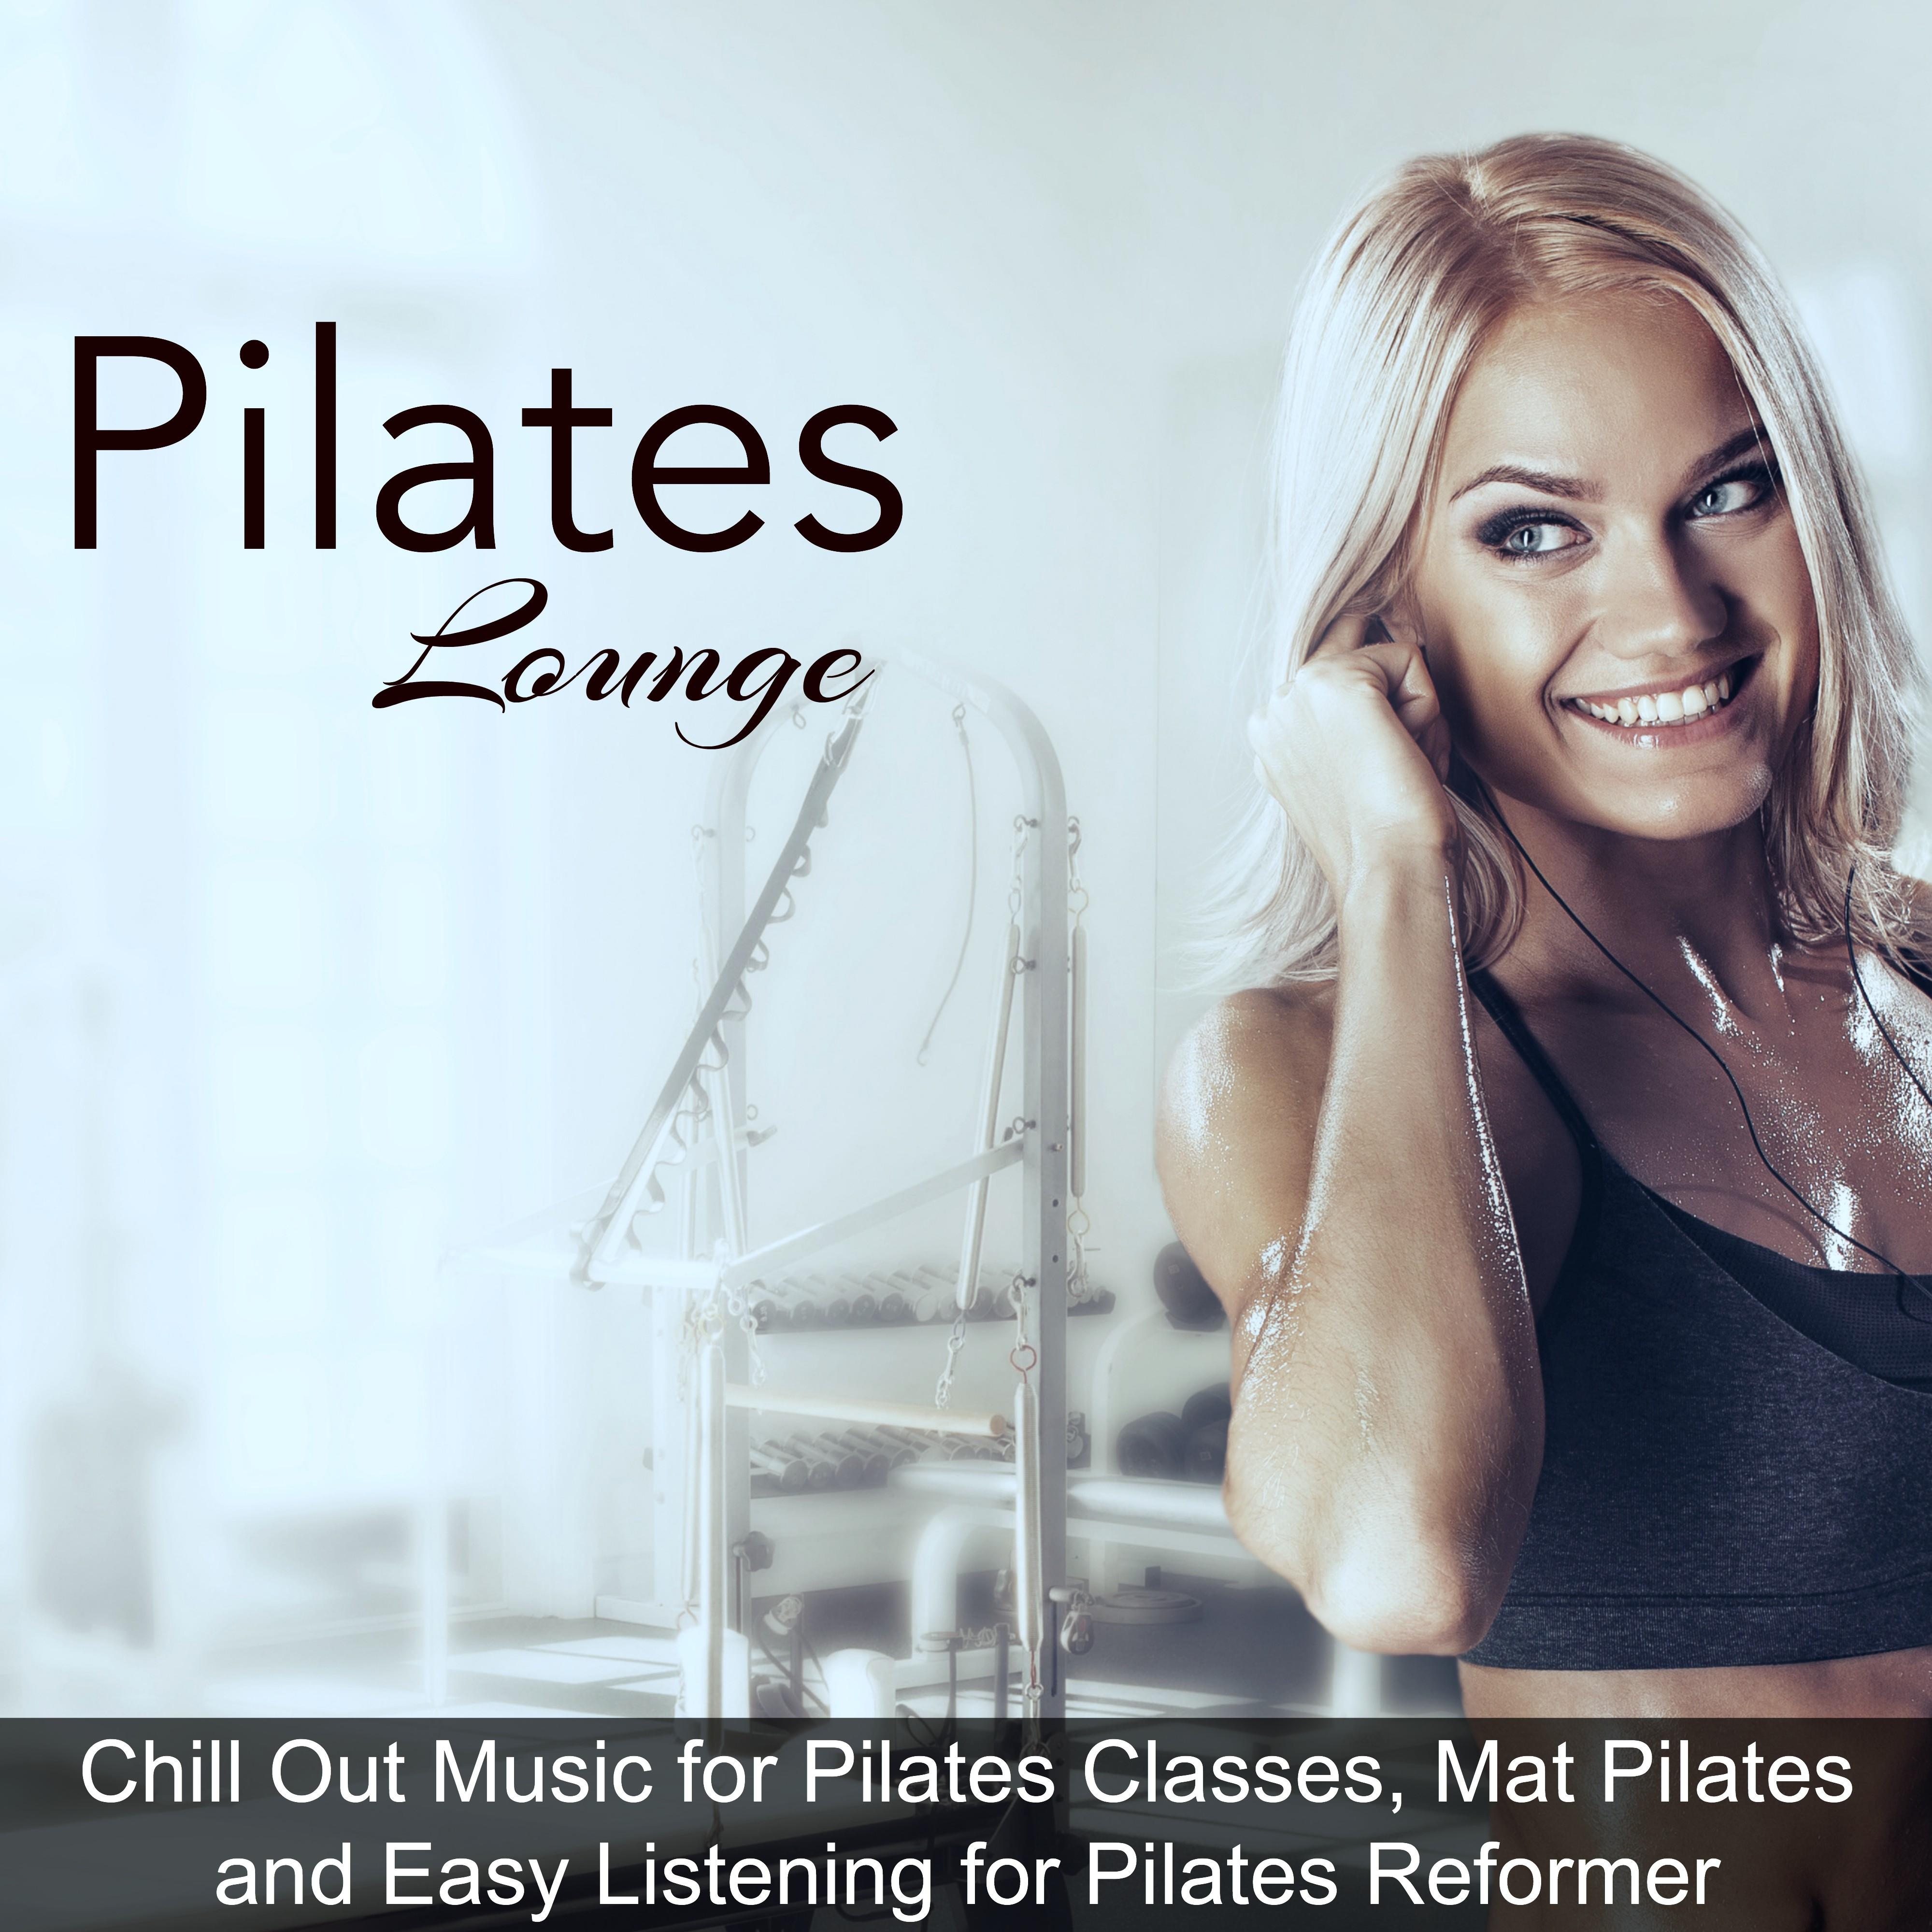 Pilates Lounge – Chill Out Music for Pilates Classes, Mat Pilates and Easy Listening for Pilates Reformer